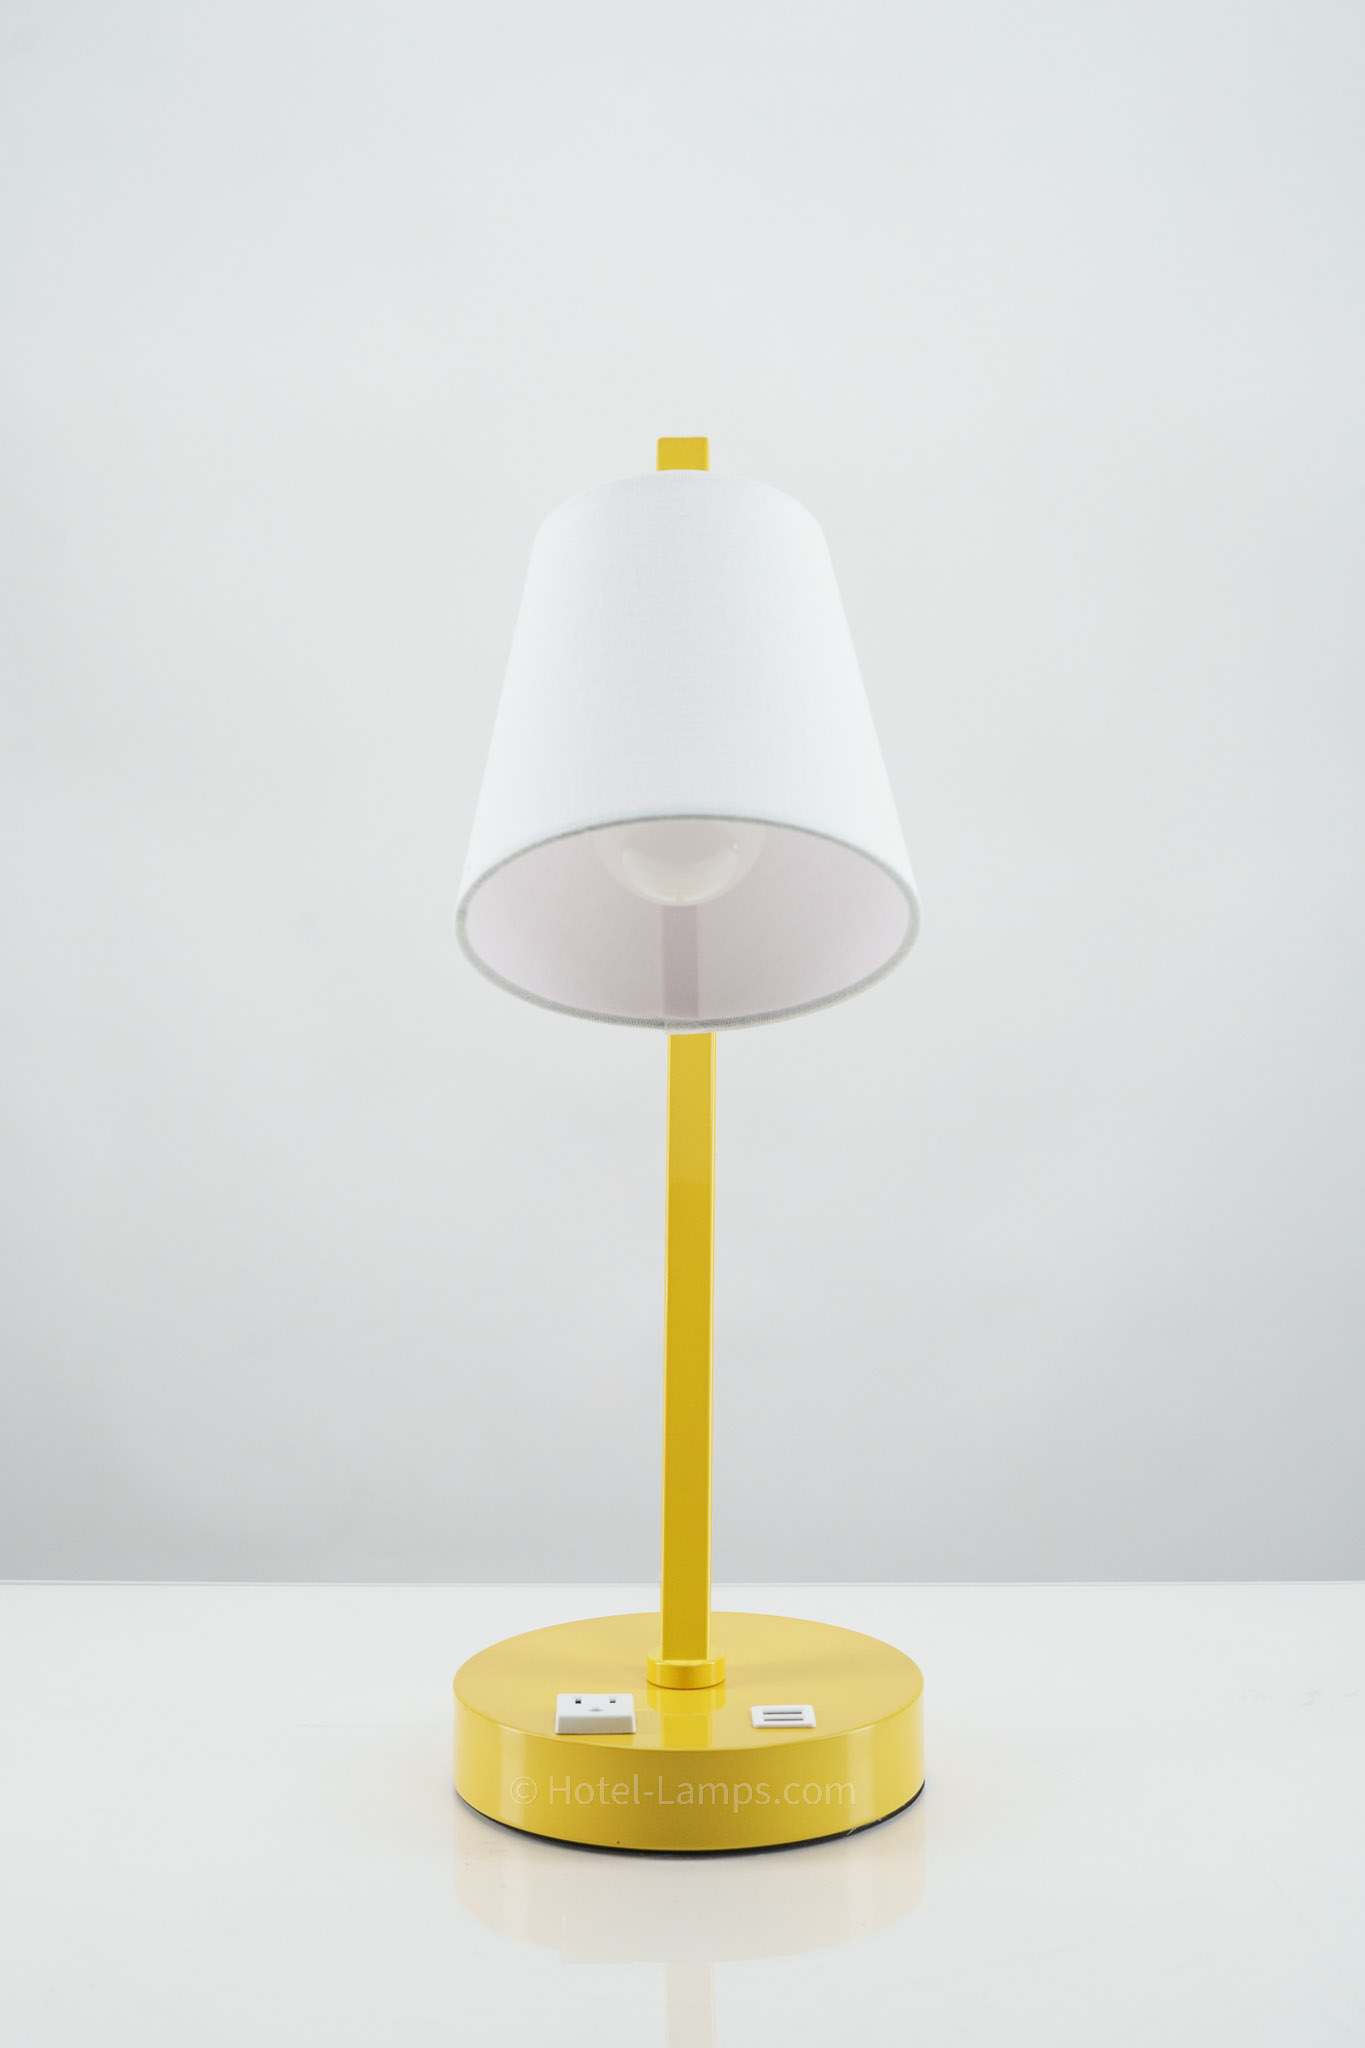 Canary yellow table lamp with white shade